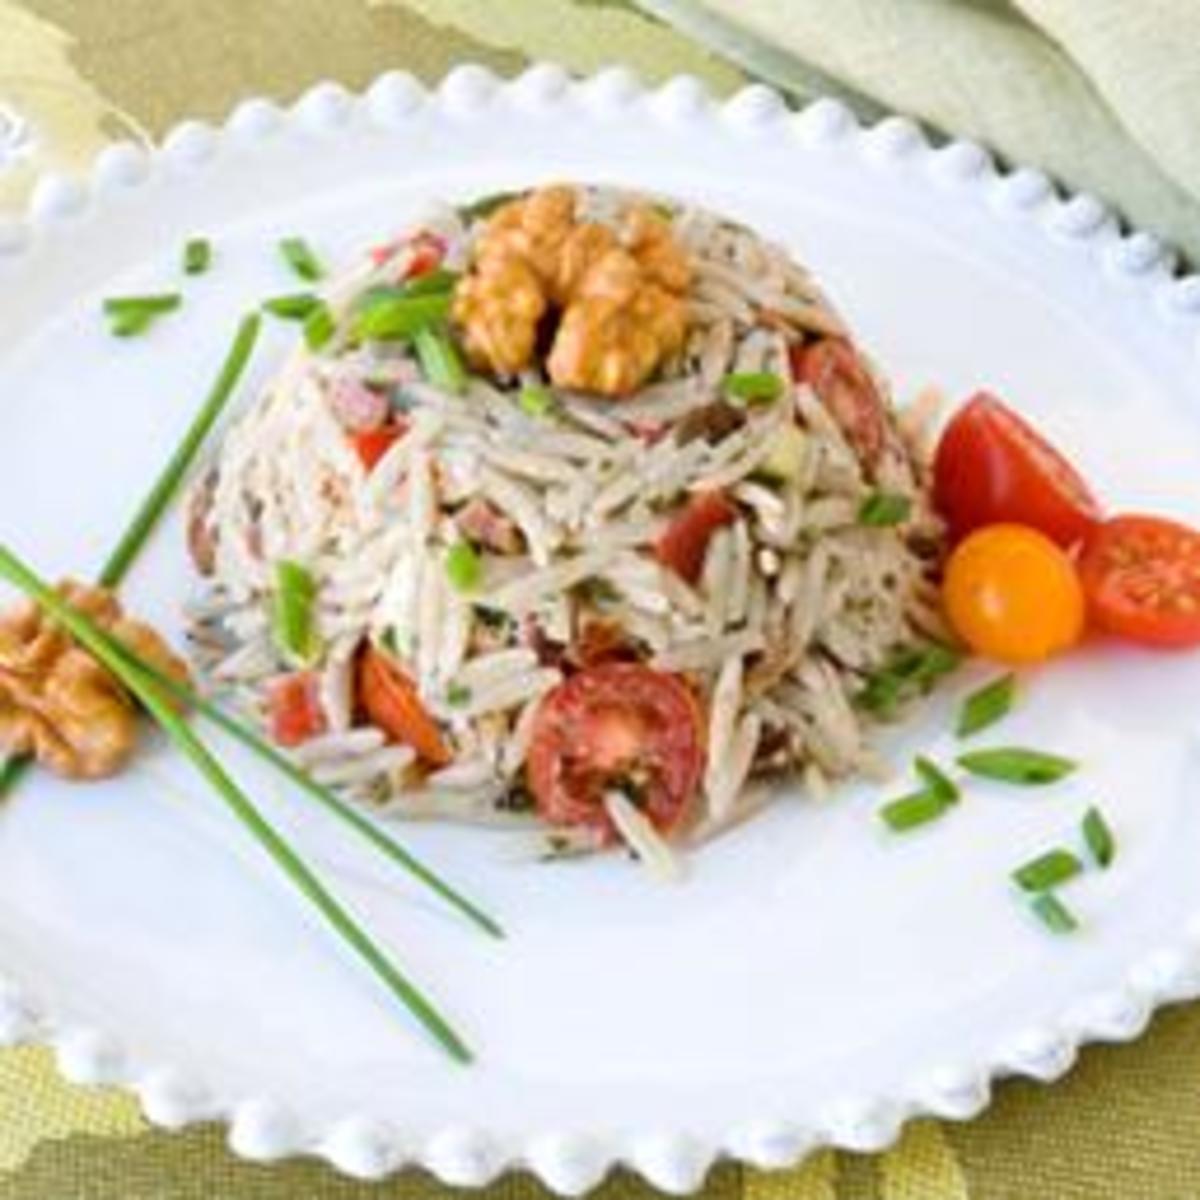 Warm Orzo and Walnut Salad with Garden Vegetables, Chevre and Herbs